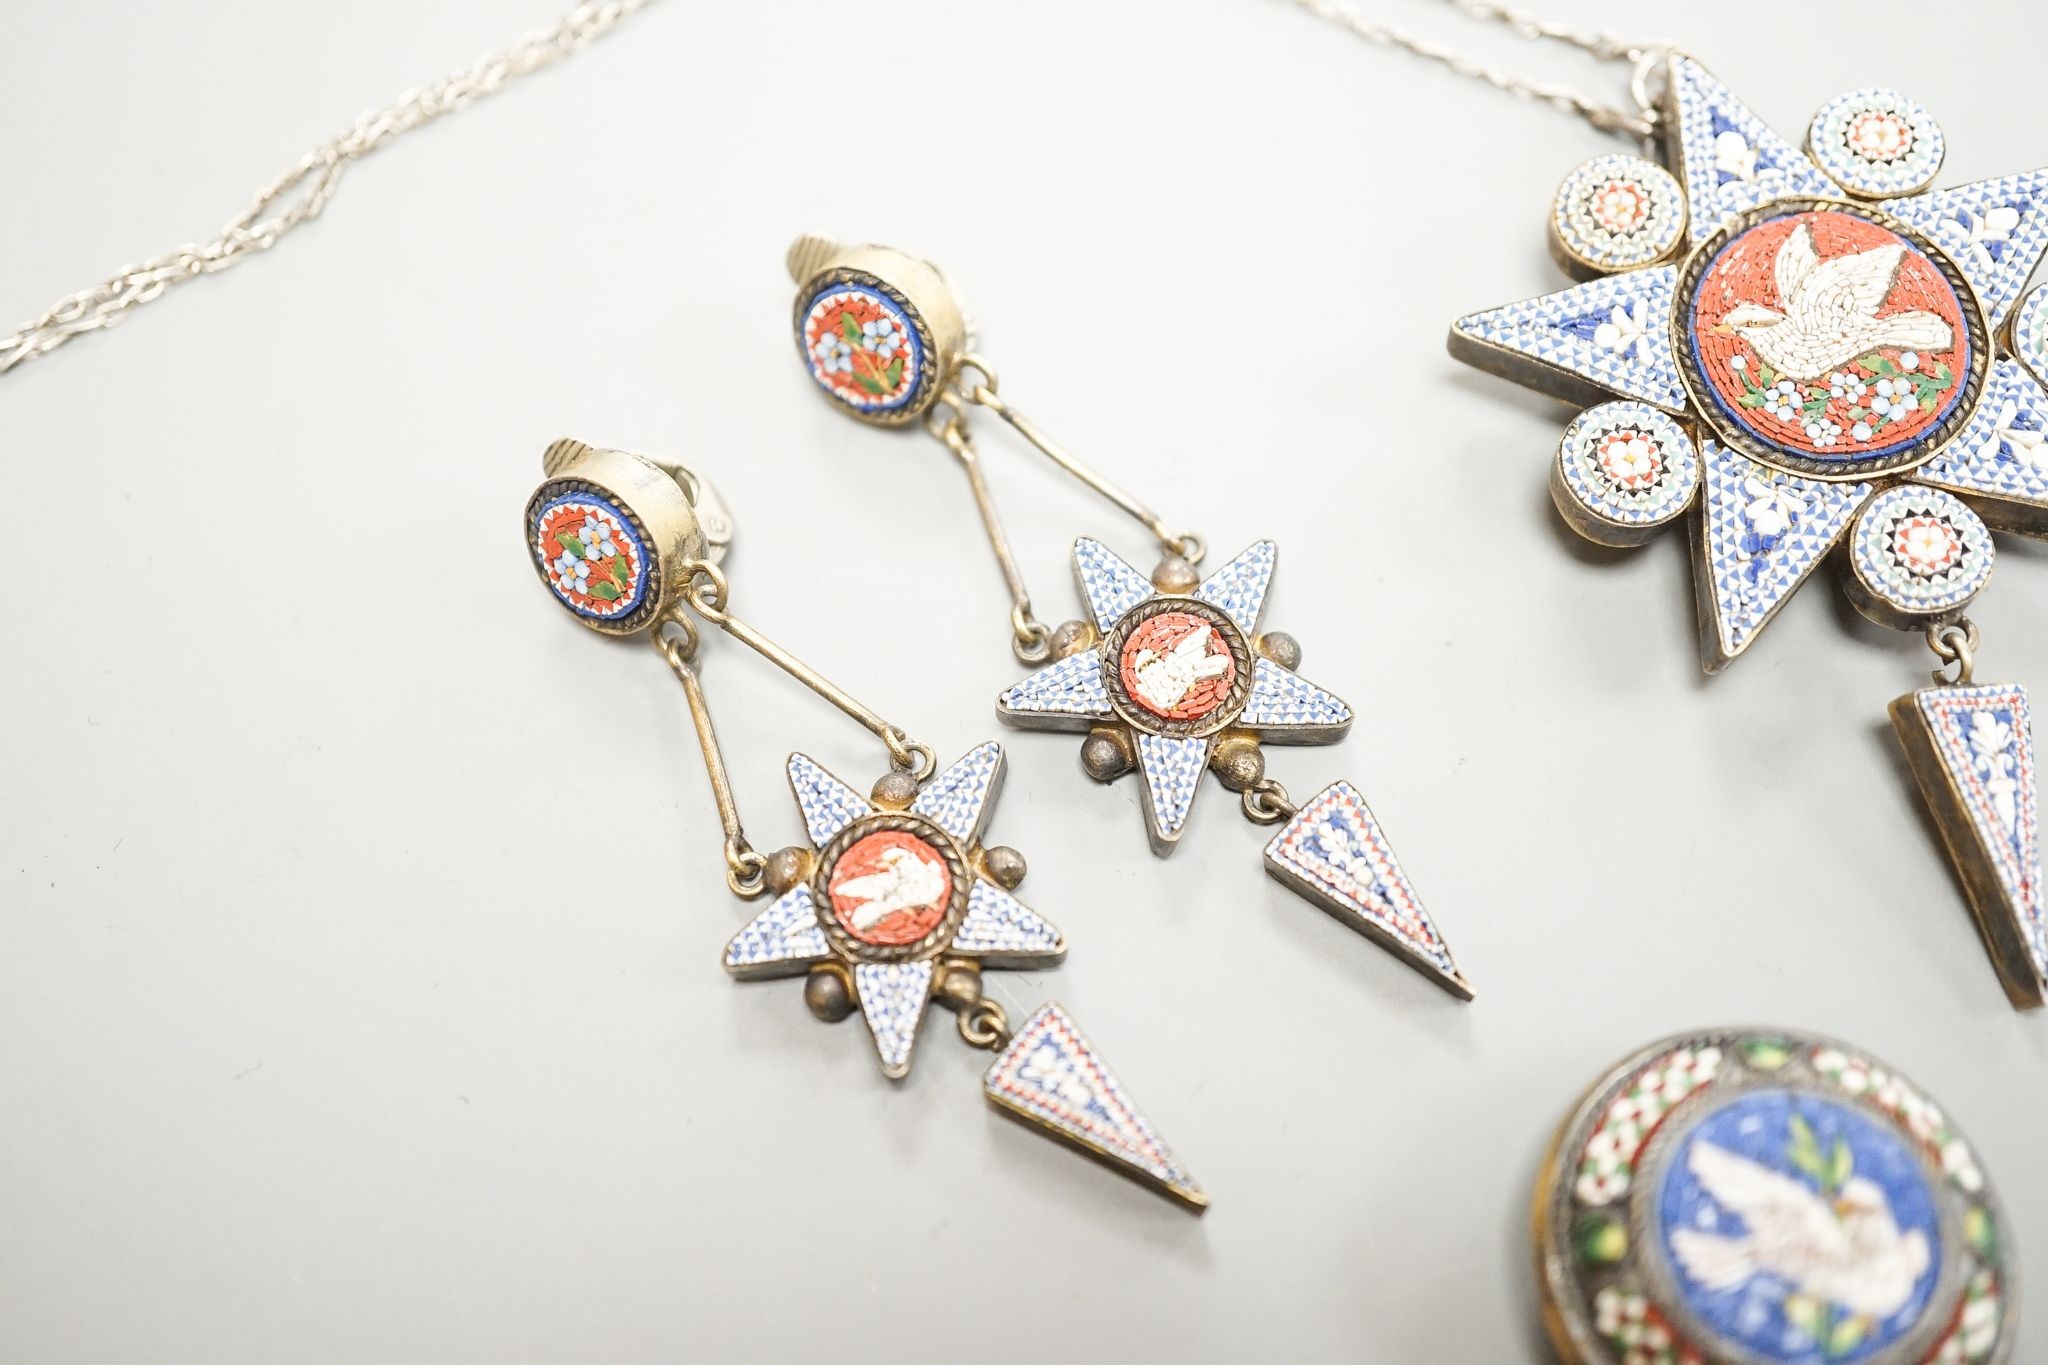 A 19th century Italian gilt metal and micro-mosaic drop pendant on chain, pendant 6cm and a pair of matching drop earrings and a micro-mosaic button